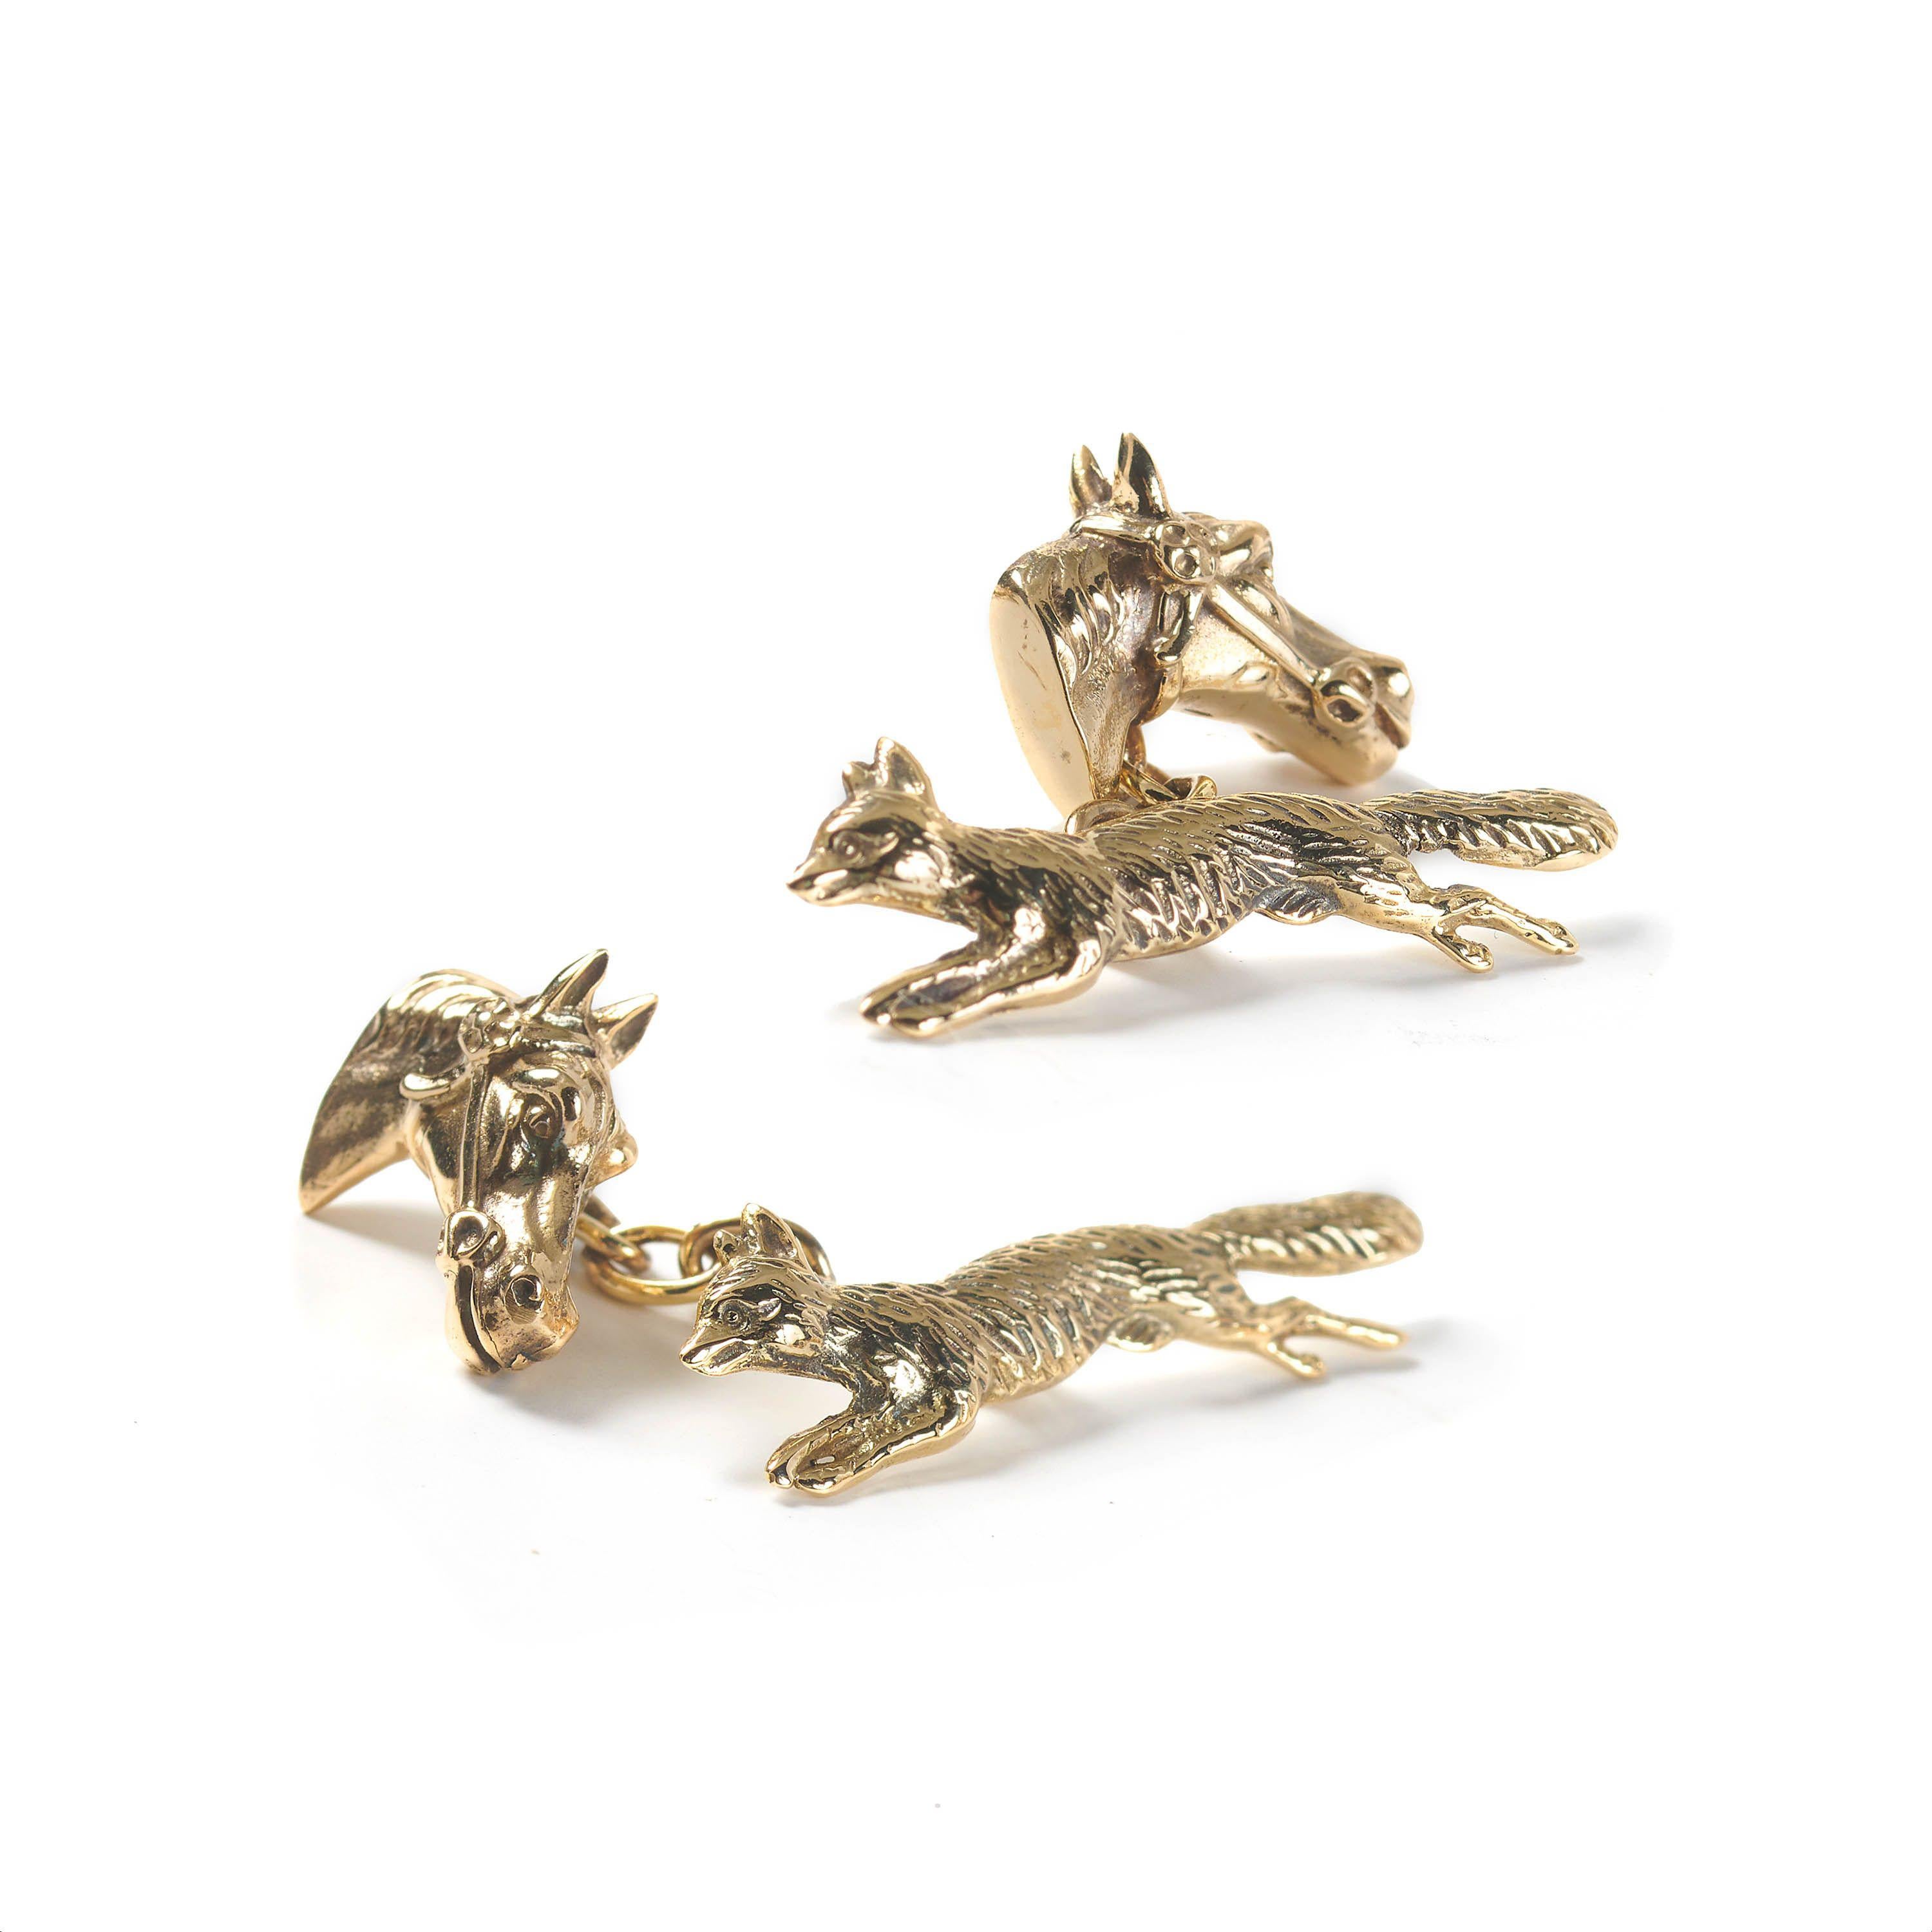 Vintage Fox And Horse 14 Karat Gold Hunting Cufflinks, Circa 1940 In Good Condition For Sale In London, GB